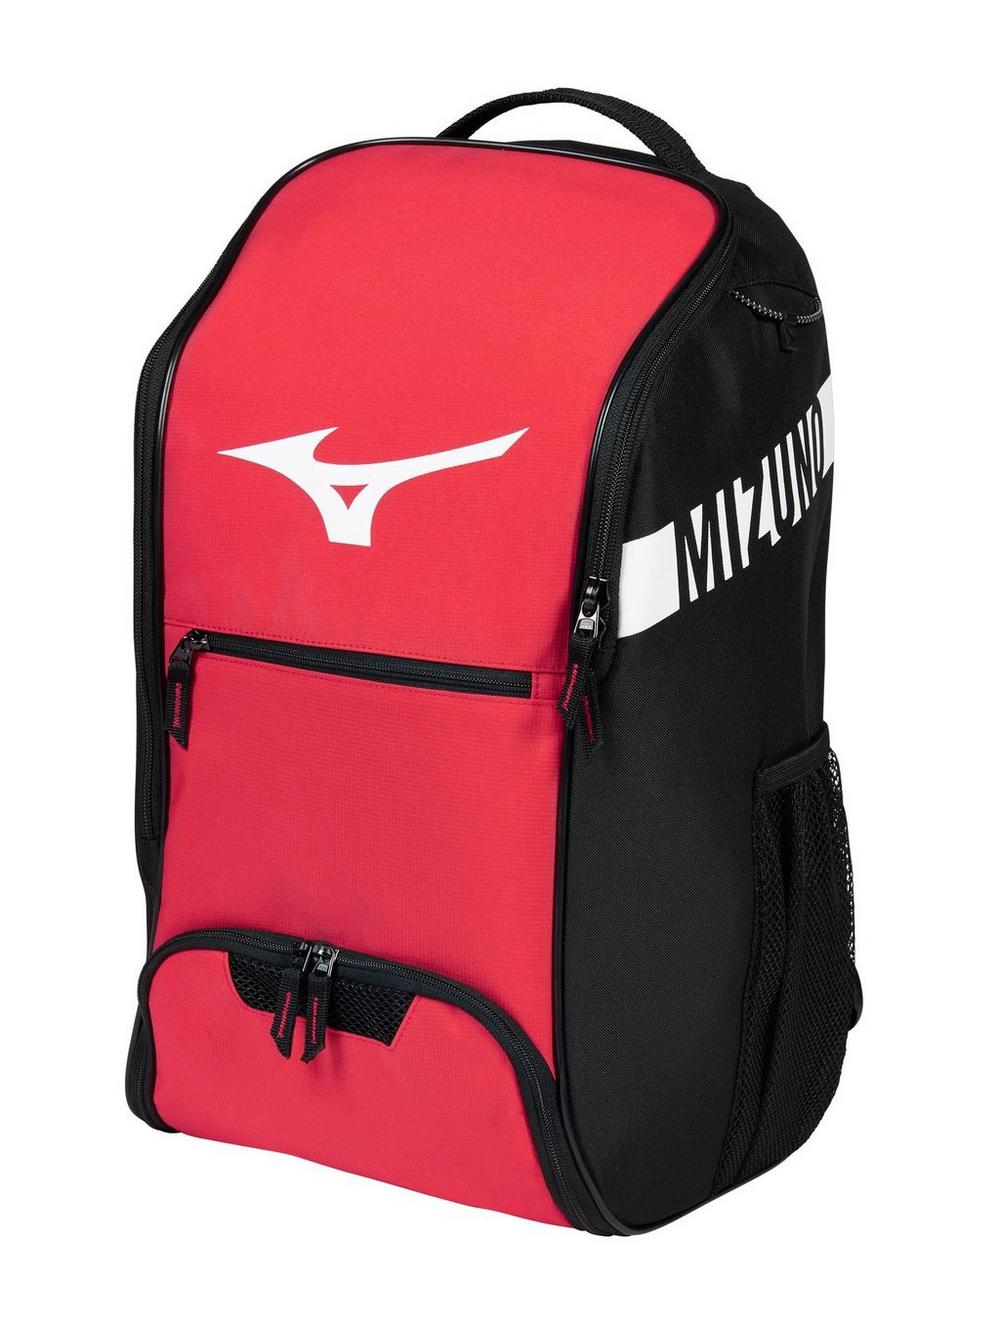 A photo of the Mizuno Crossover Backpack 22 in colour red.